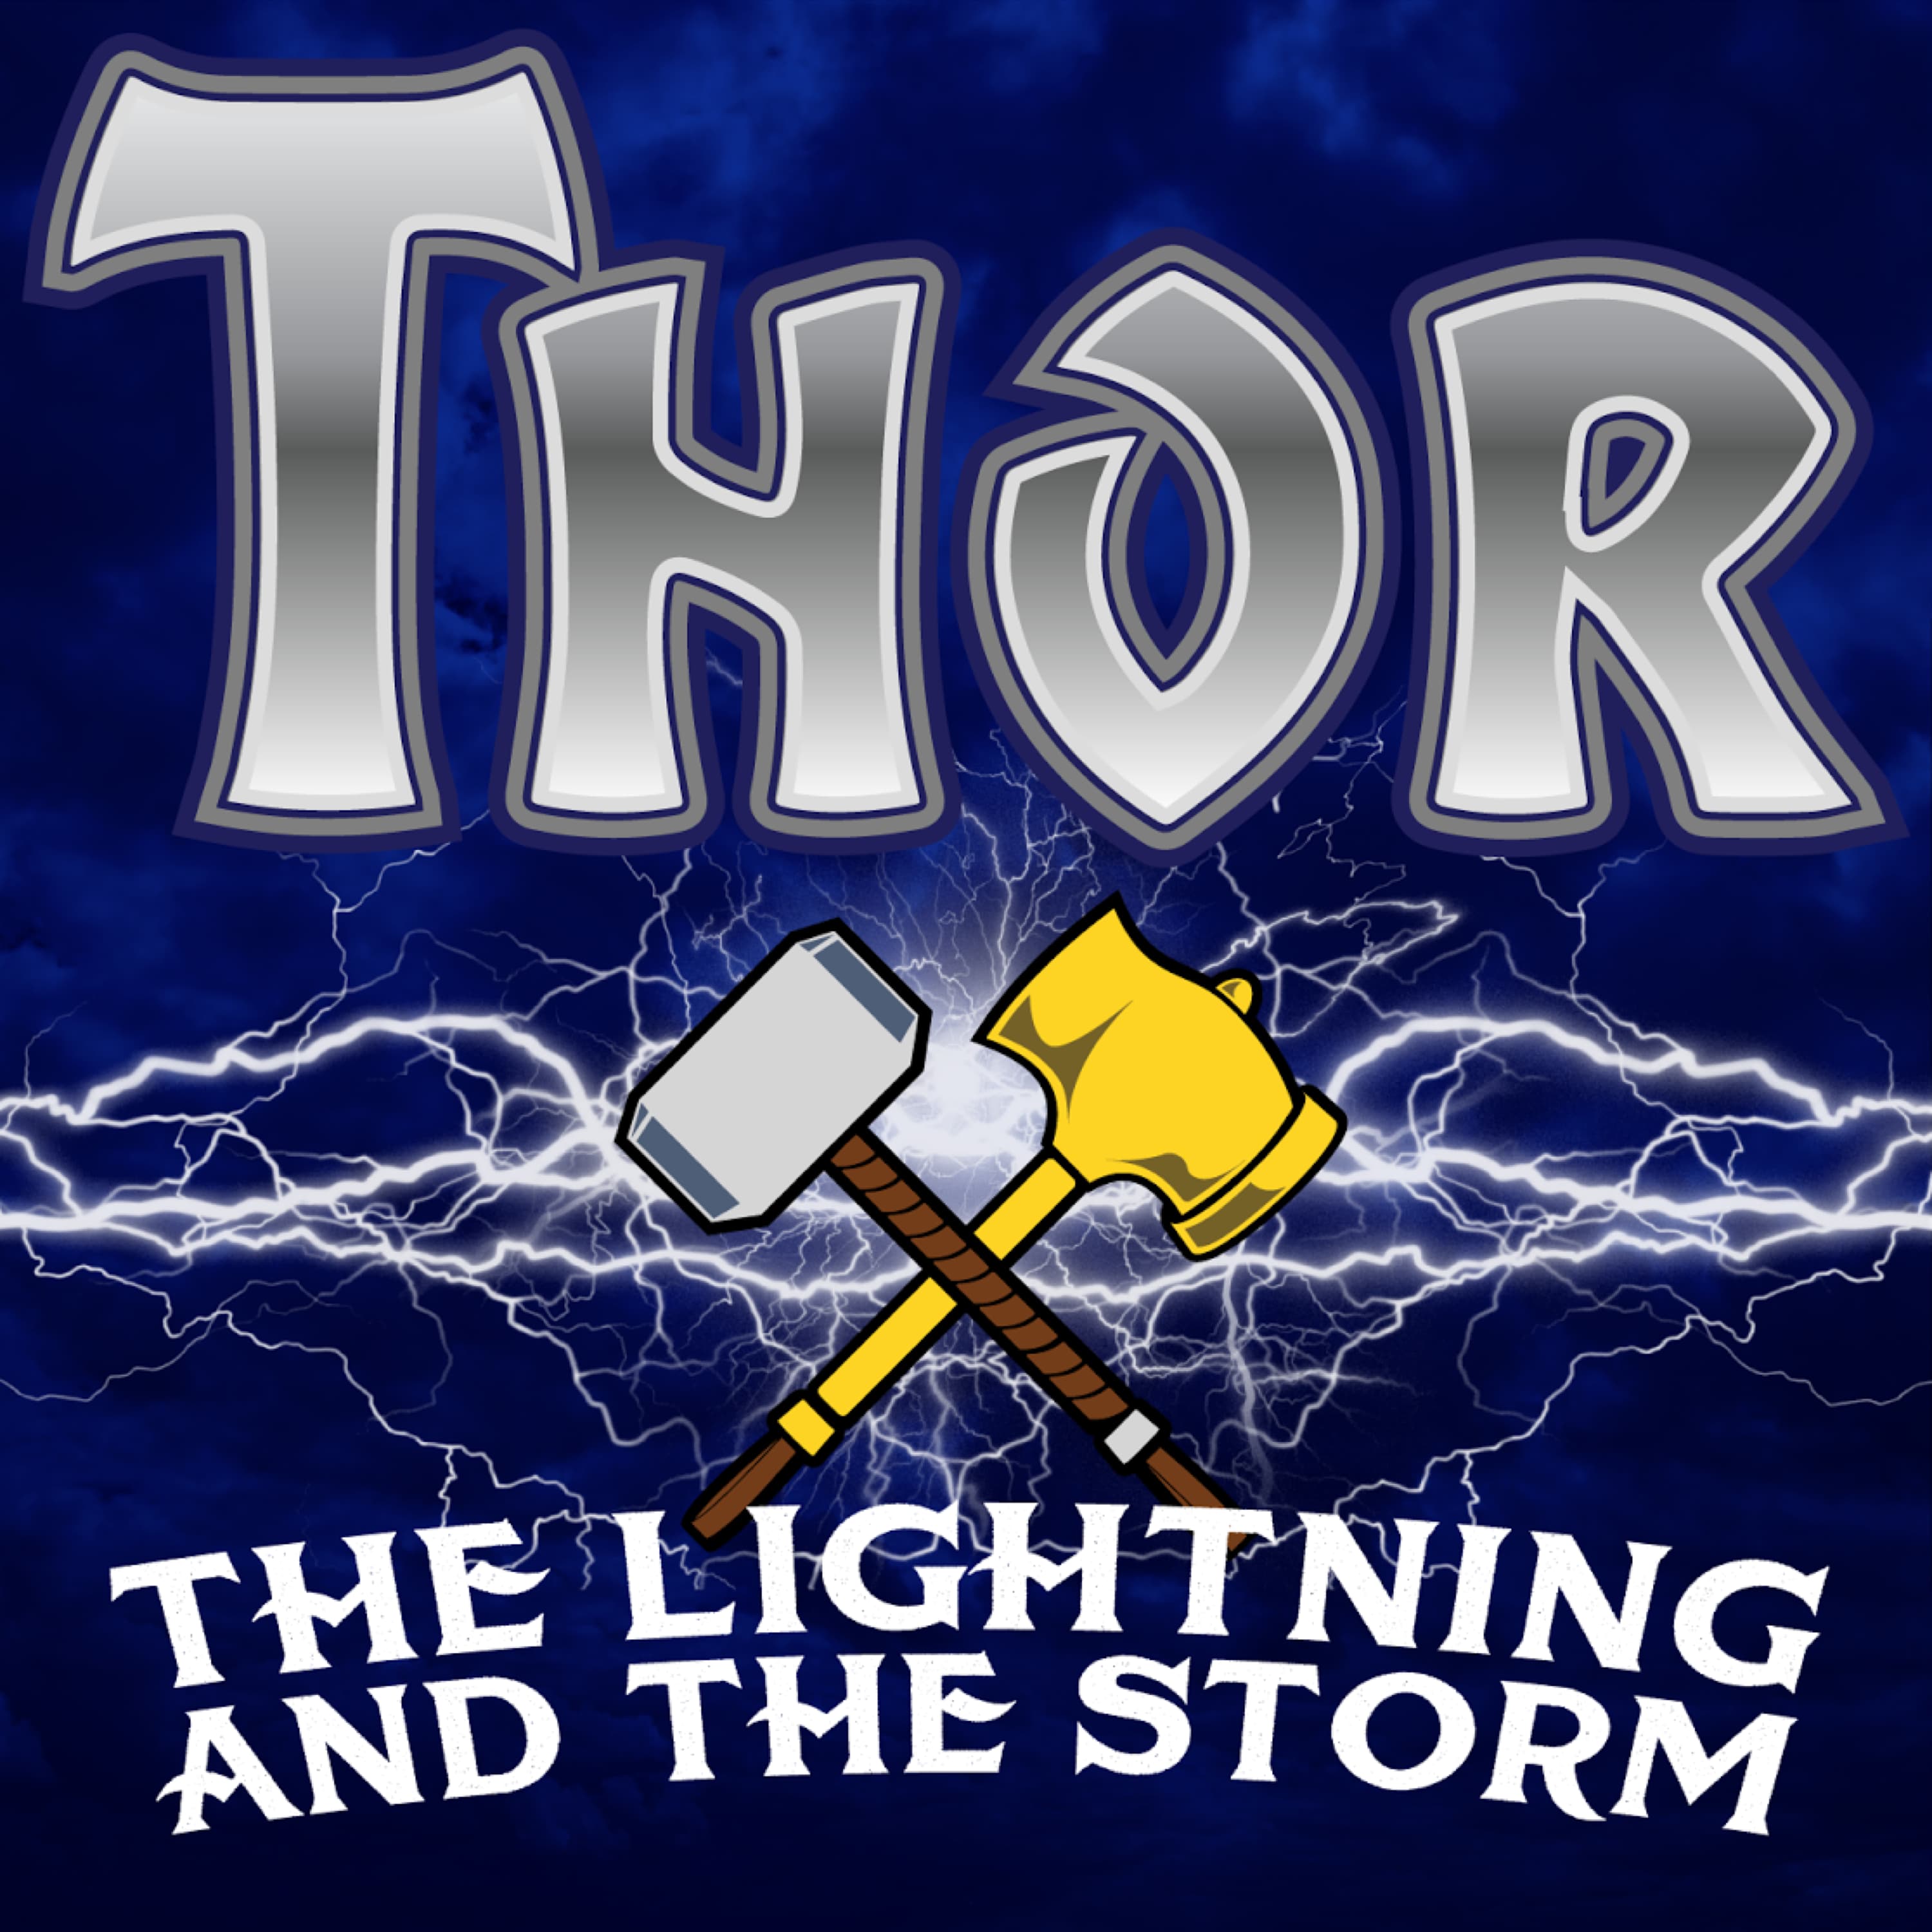 THOR: The Lightning and the Storm